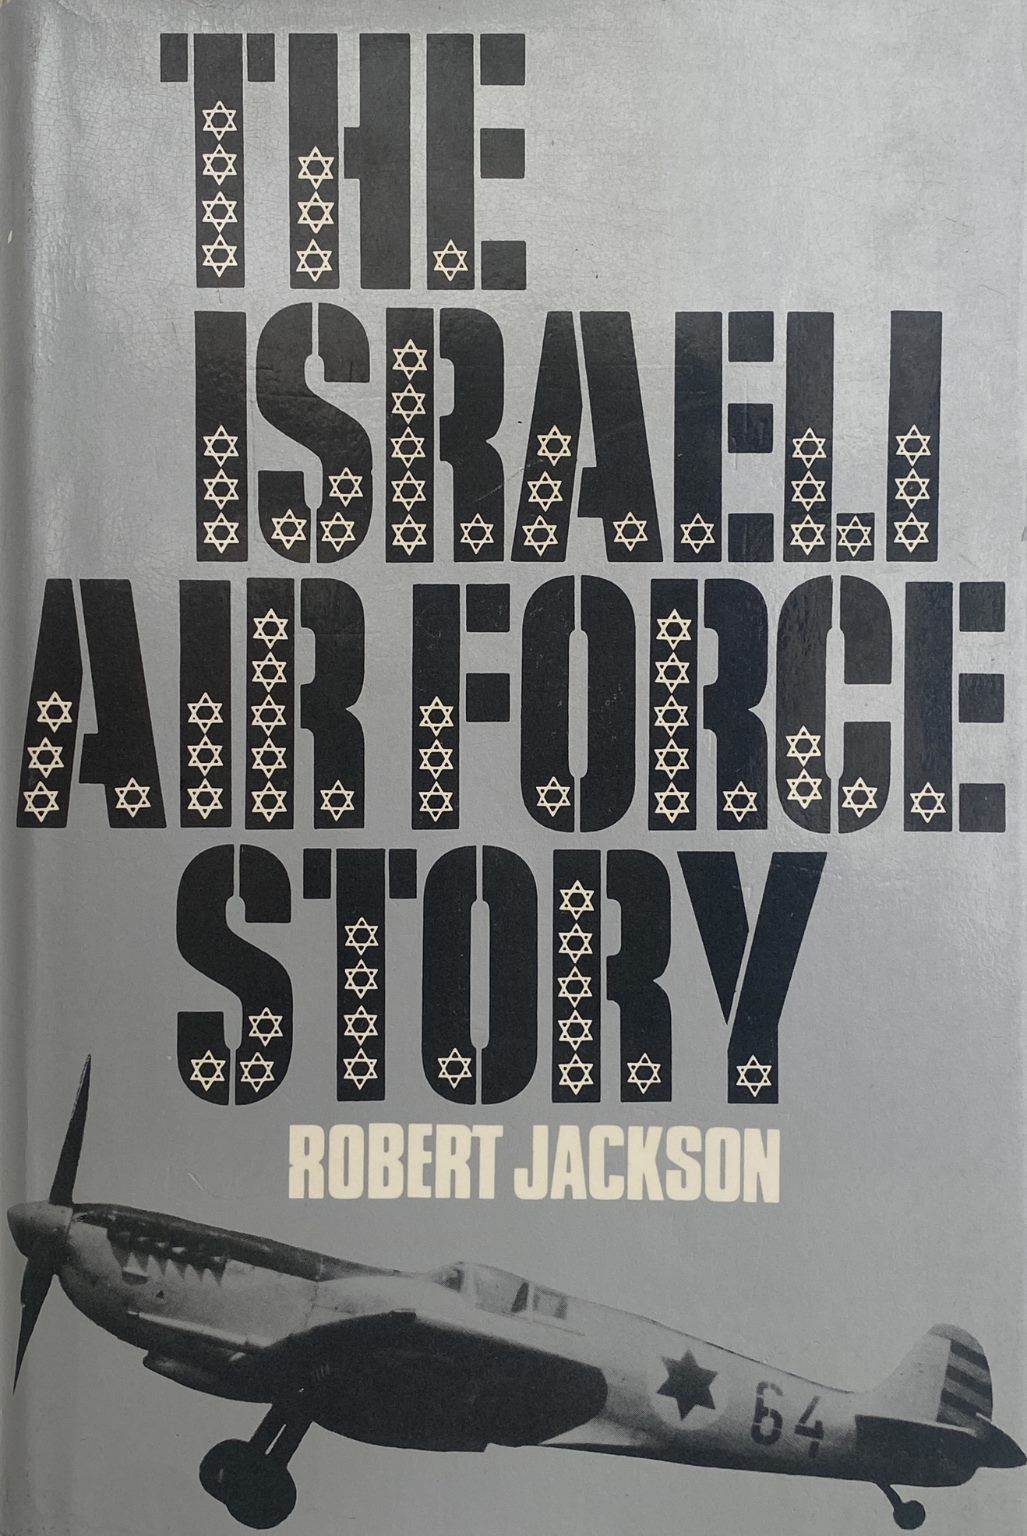 THE ISRAELI AIR FORCE STORY